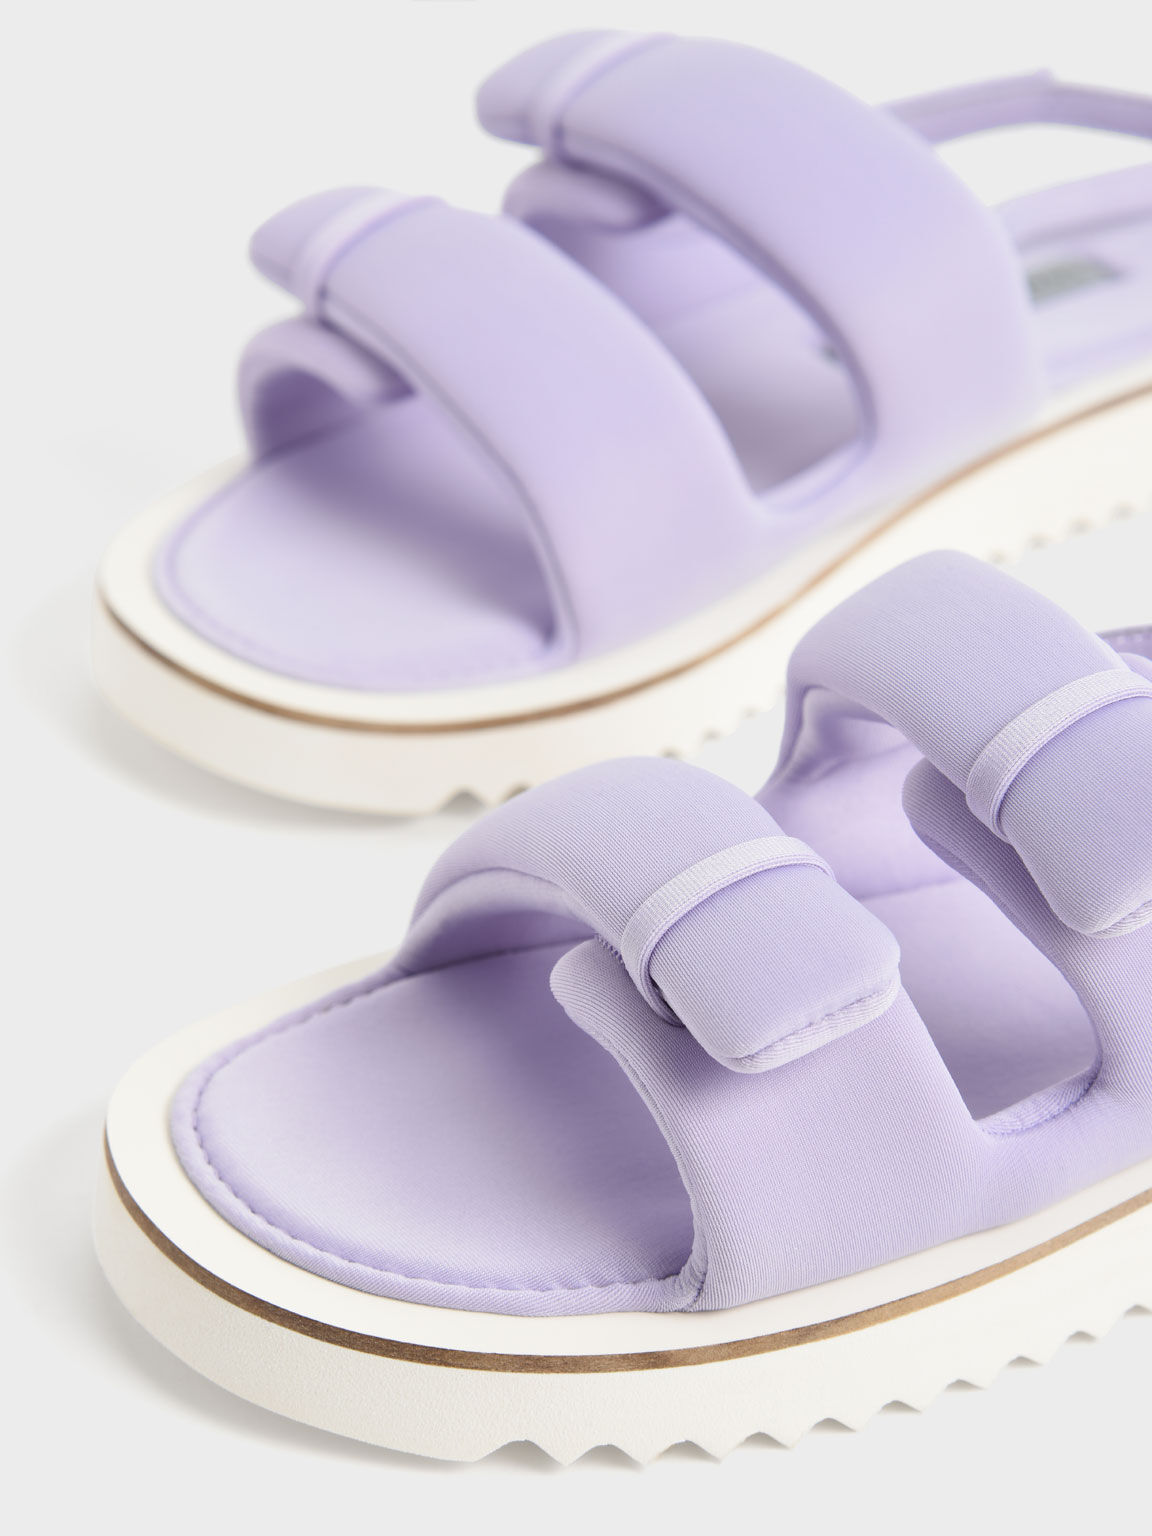 Recycled Polyester Sports Sandals, Lilac, hi-res